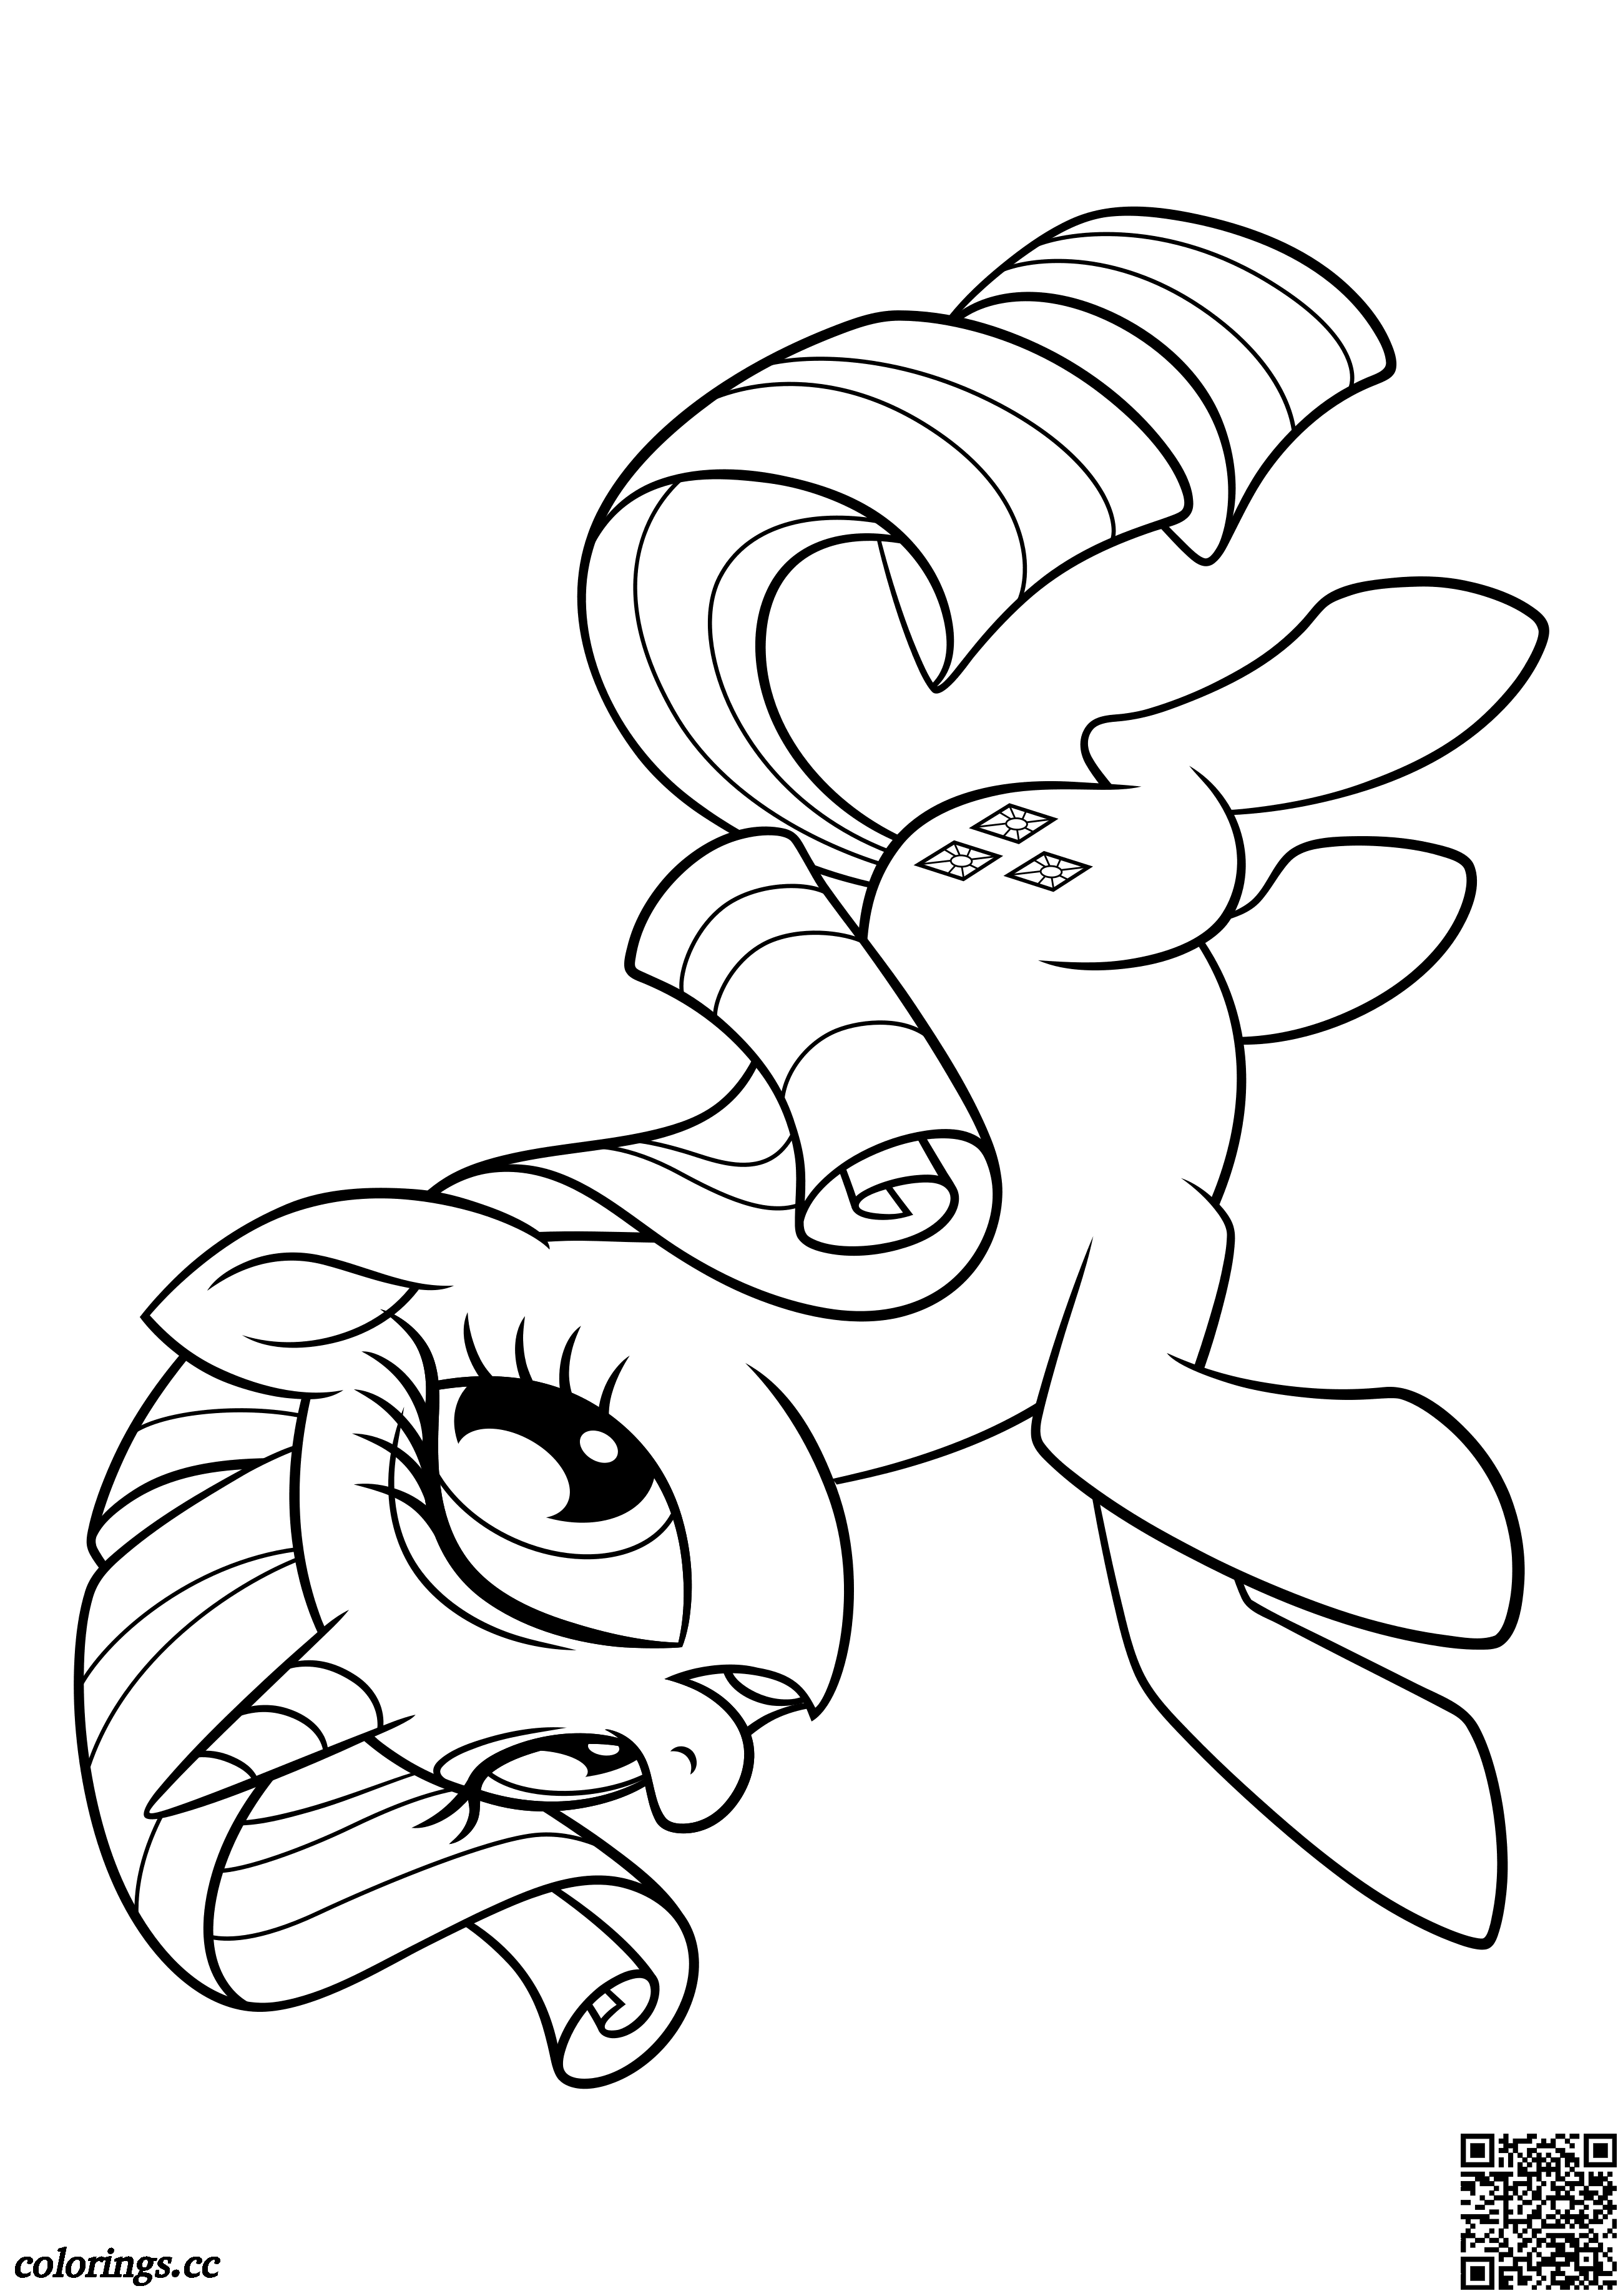 Rarity coloring pages, My little pony movie coloring pages ...